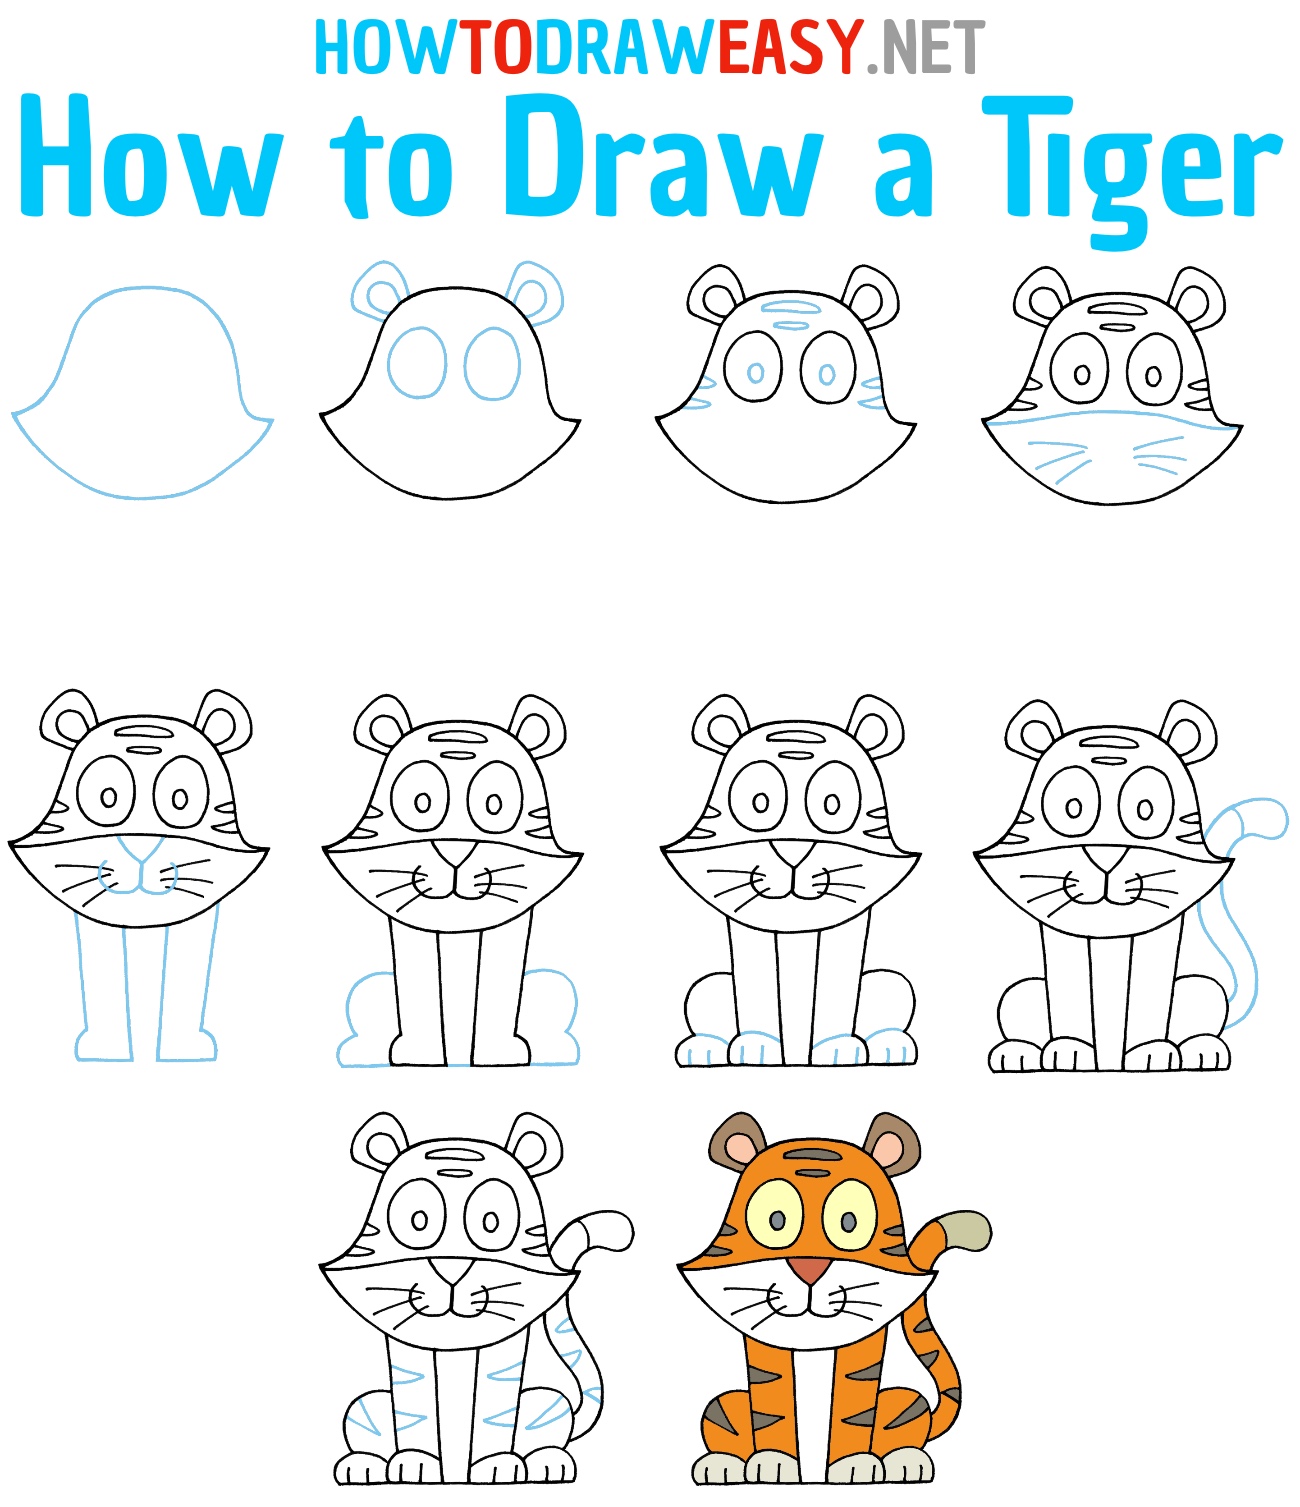 How to Draw a Tiger Step by Step